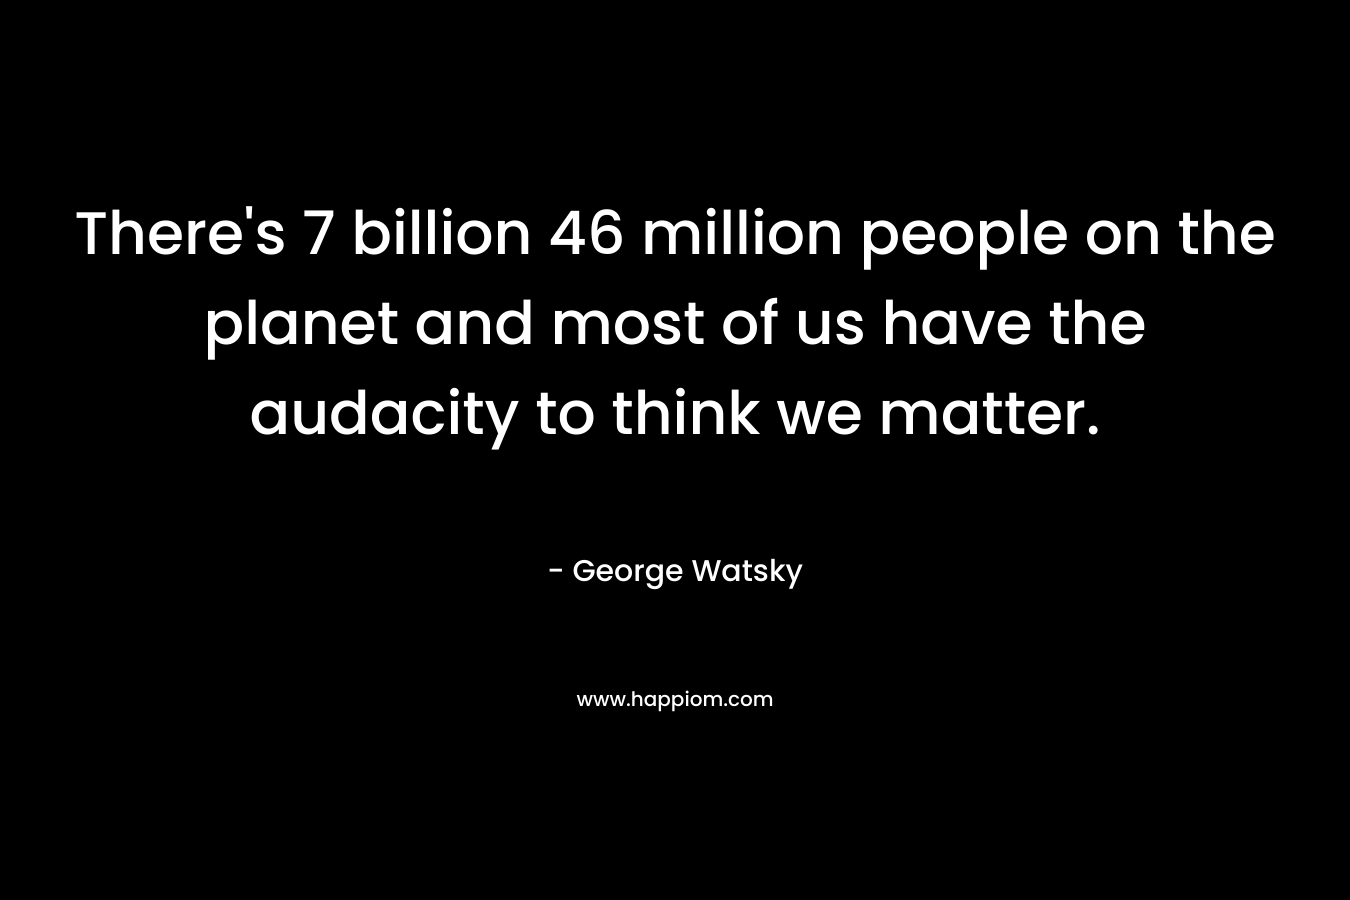 There’s 7 billion 46 million people on the planet and most of us have the audacity to think we matter. – George Watsky